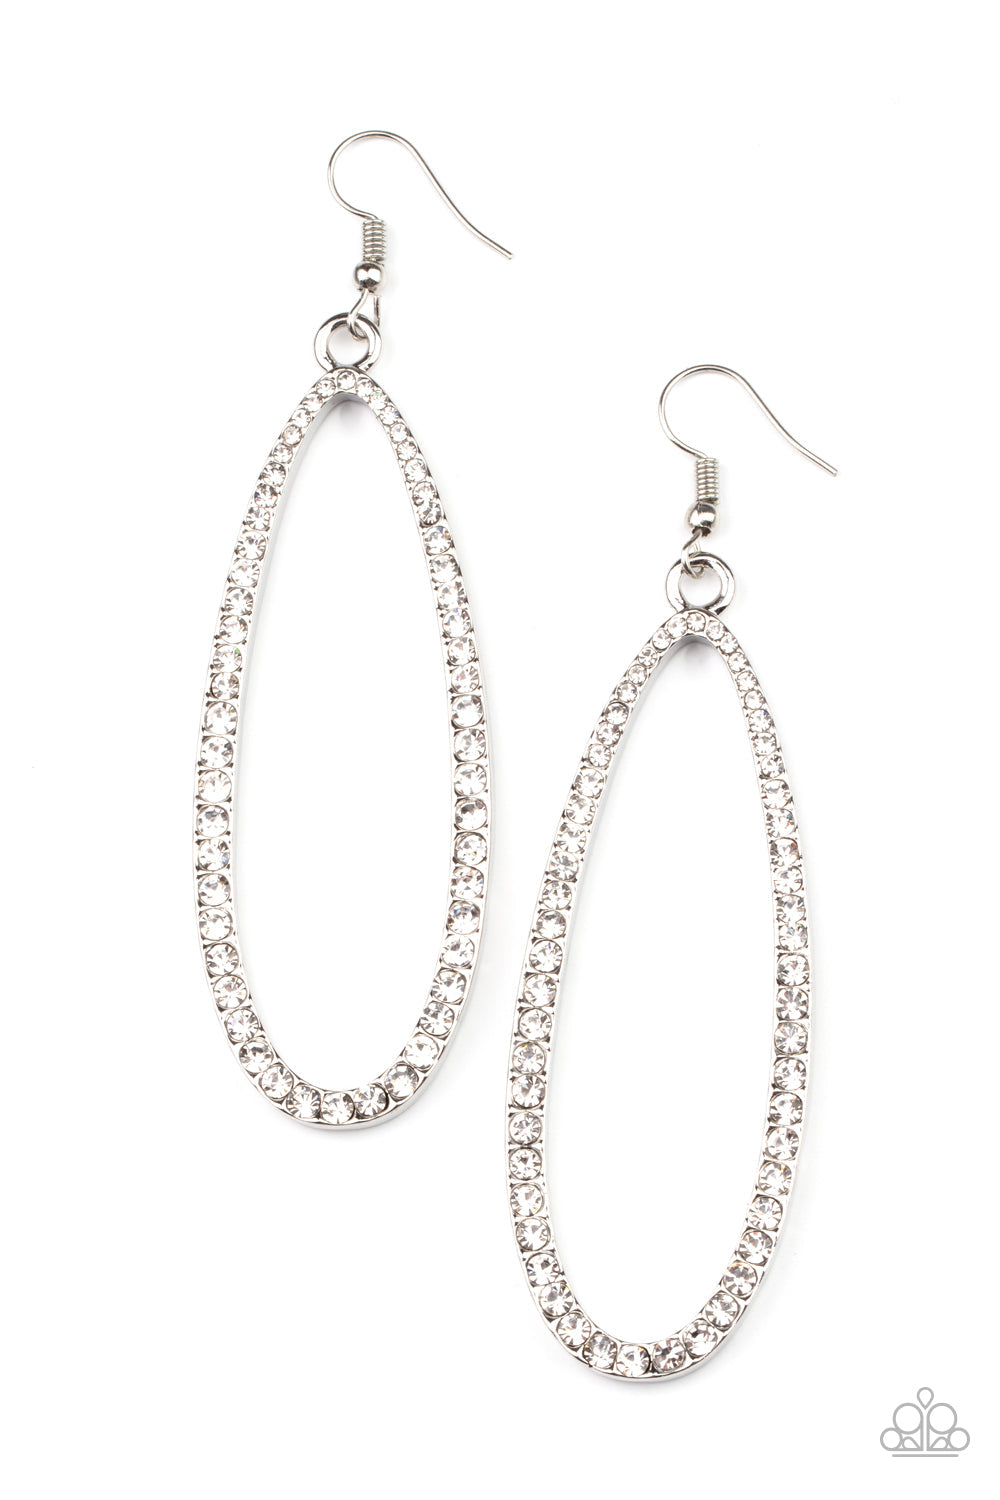 Dazzling Decorum - White and Silver Earrings - Paparazzi Accessories - 
The front of a lengthened silver oval frame is encrusted in glittery white rhinestones, creating a glamorous centerpiece. Earring attaches to a standard fishhook fitting. Sold as one pair of earrings.
